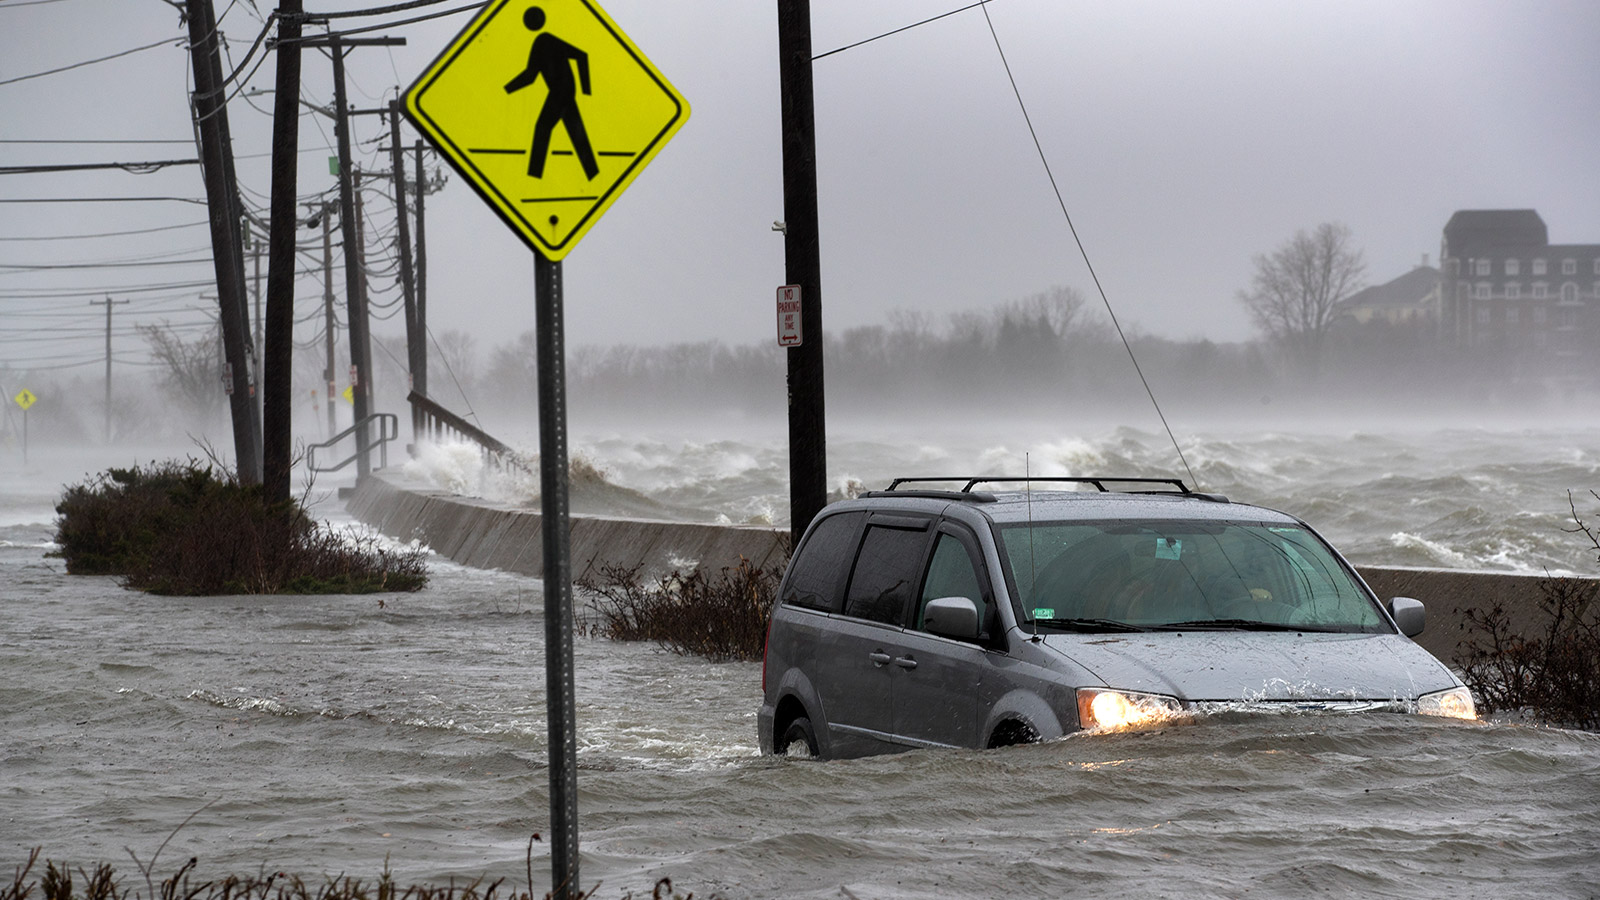 Rising seas could wipe out 1 trillion worth of U.S. homes and